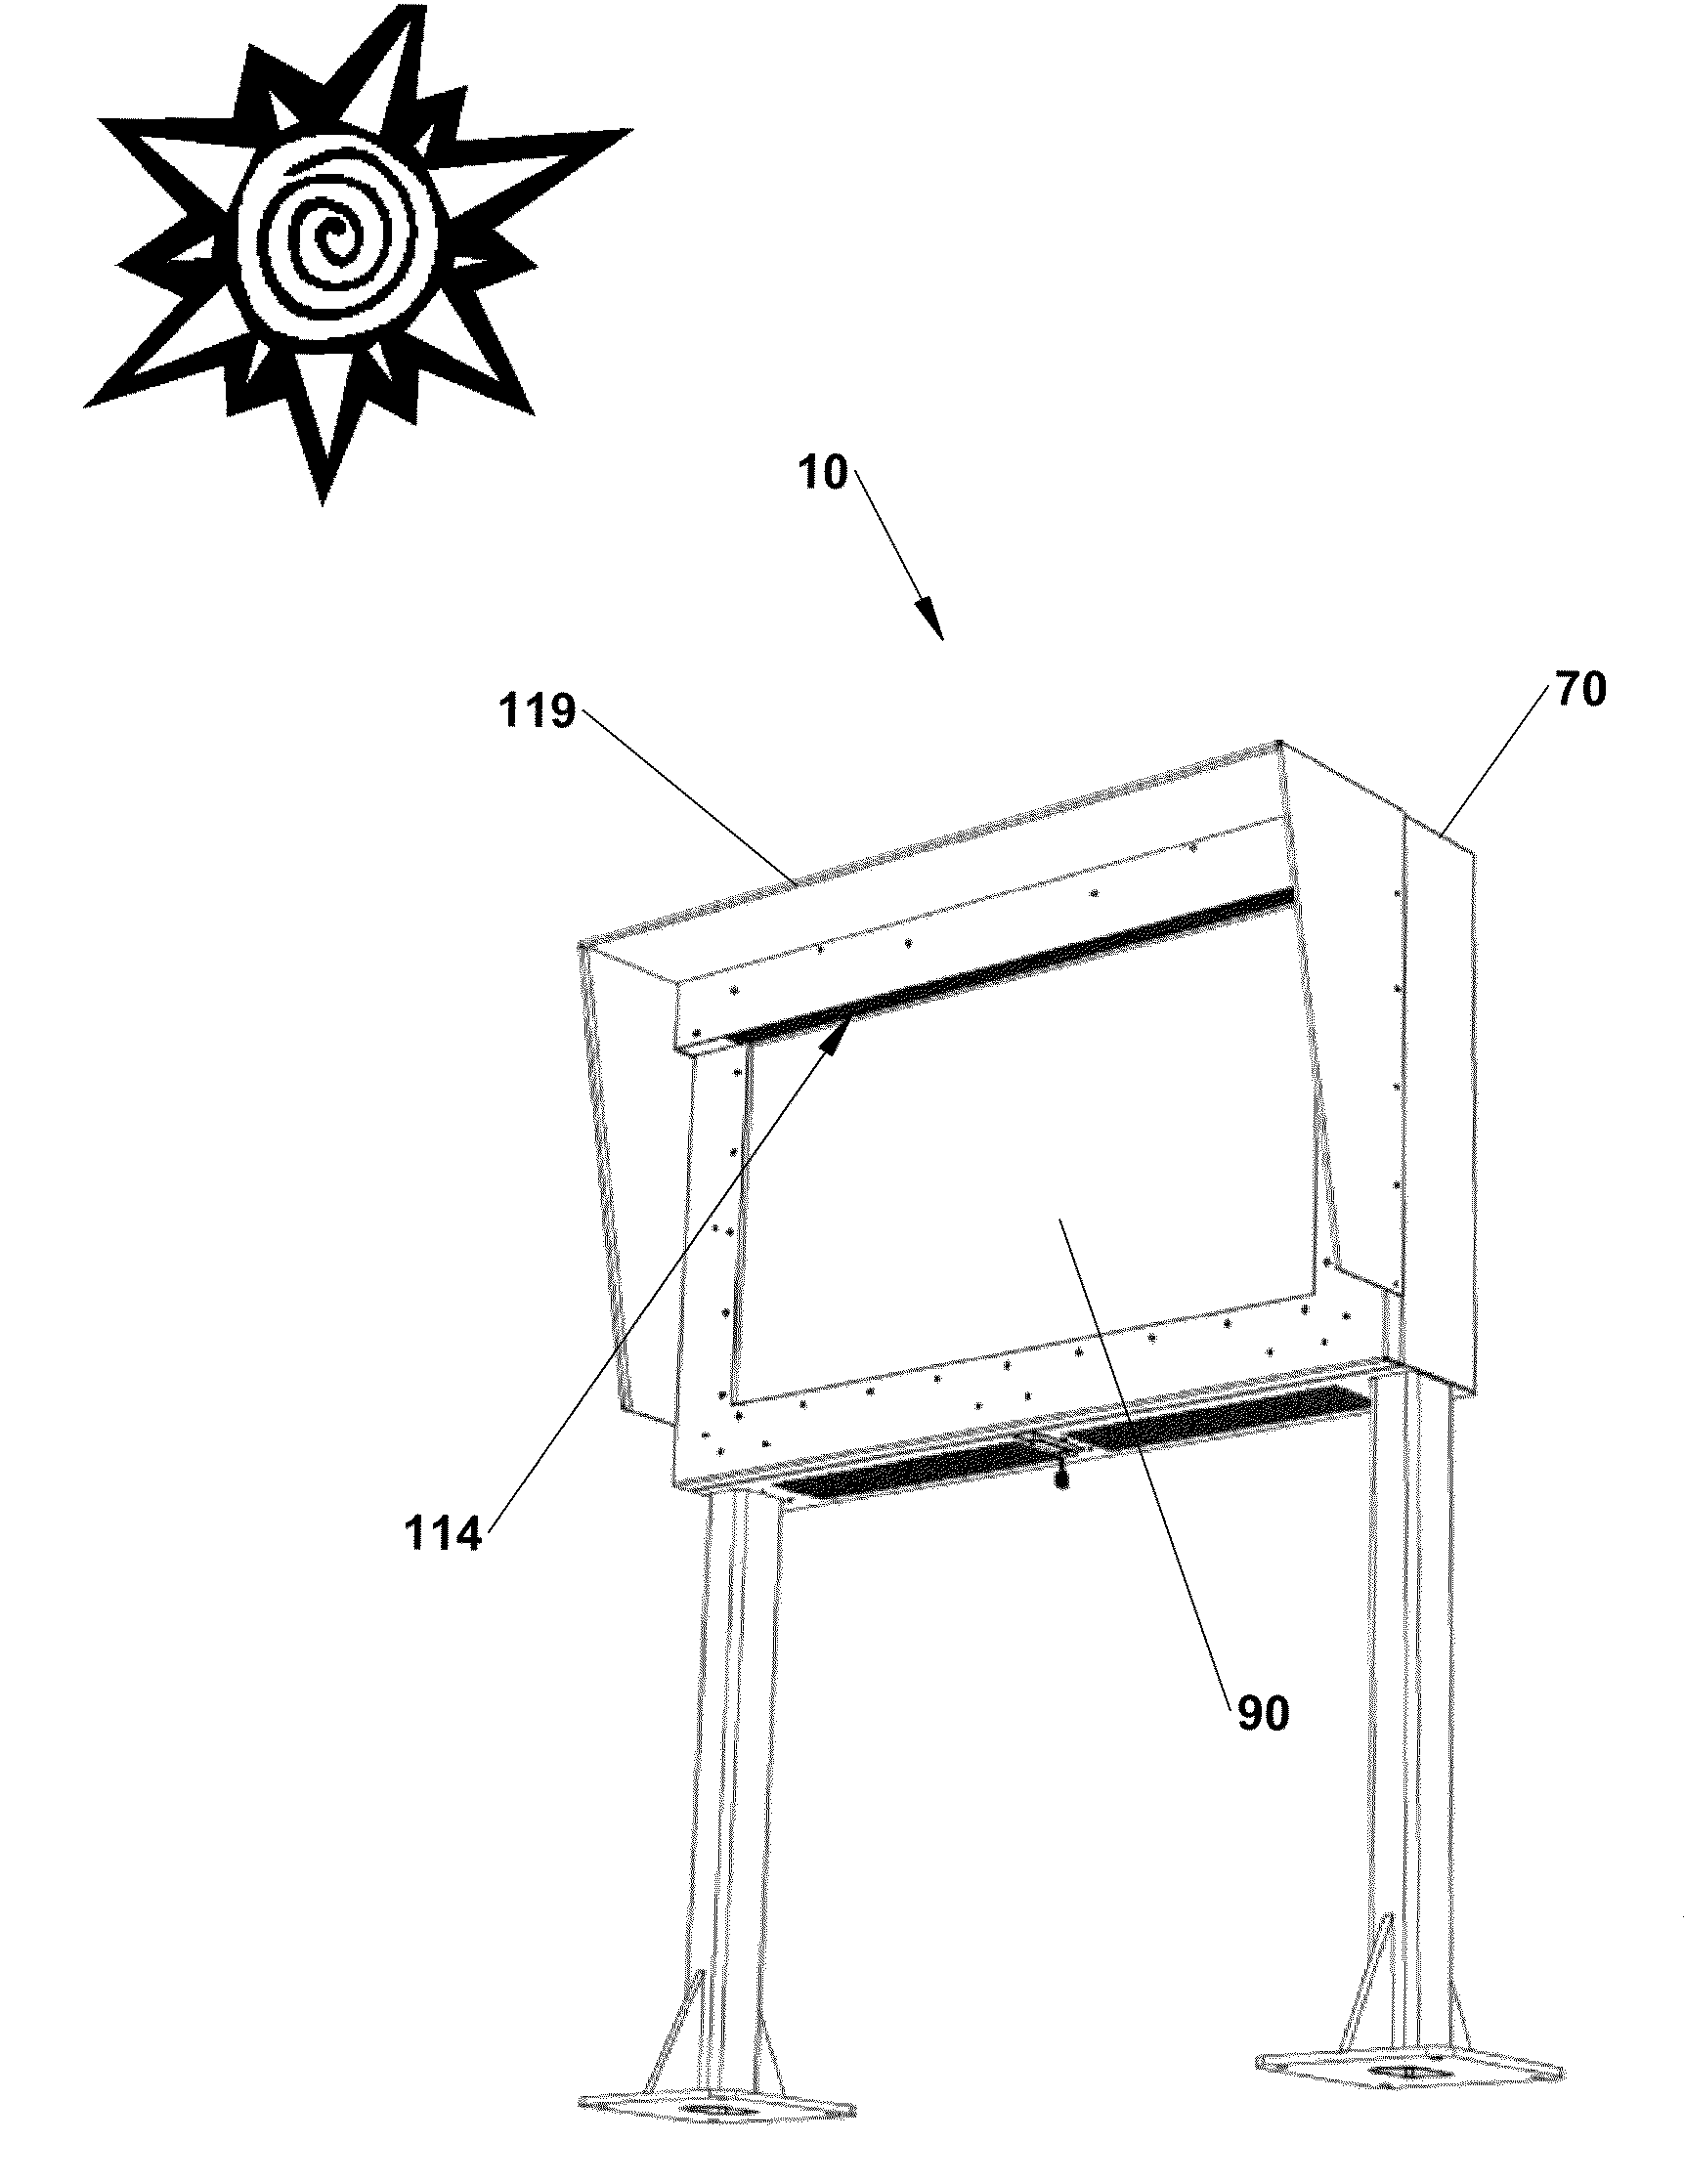 Isolated Cooling System Having an Insulator Gap and Front Polarizer